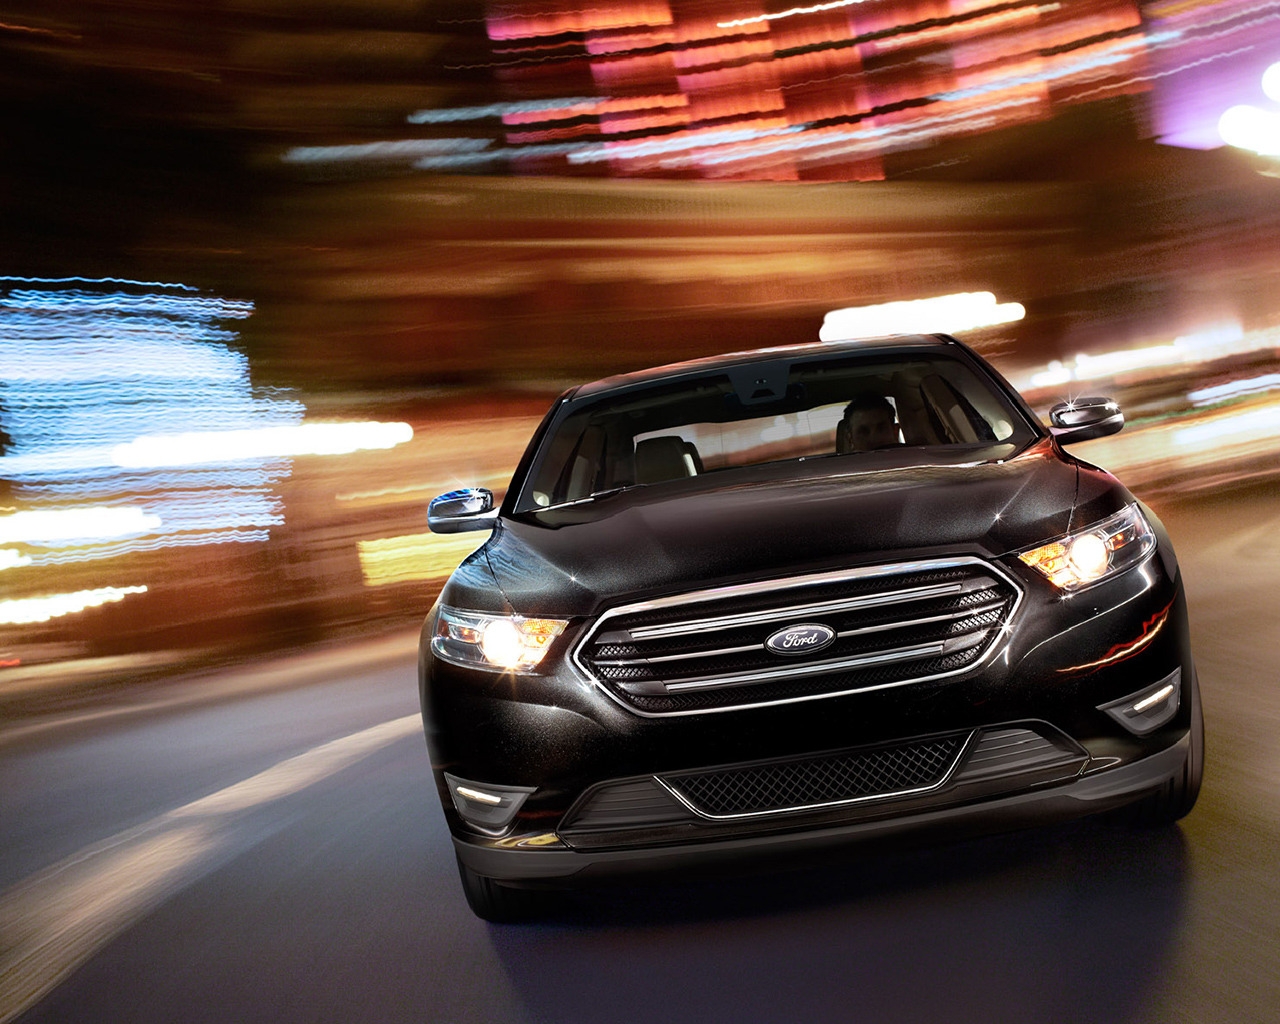 2013 Ford Taurus Limited for 1280 x 1024 resolution